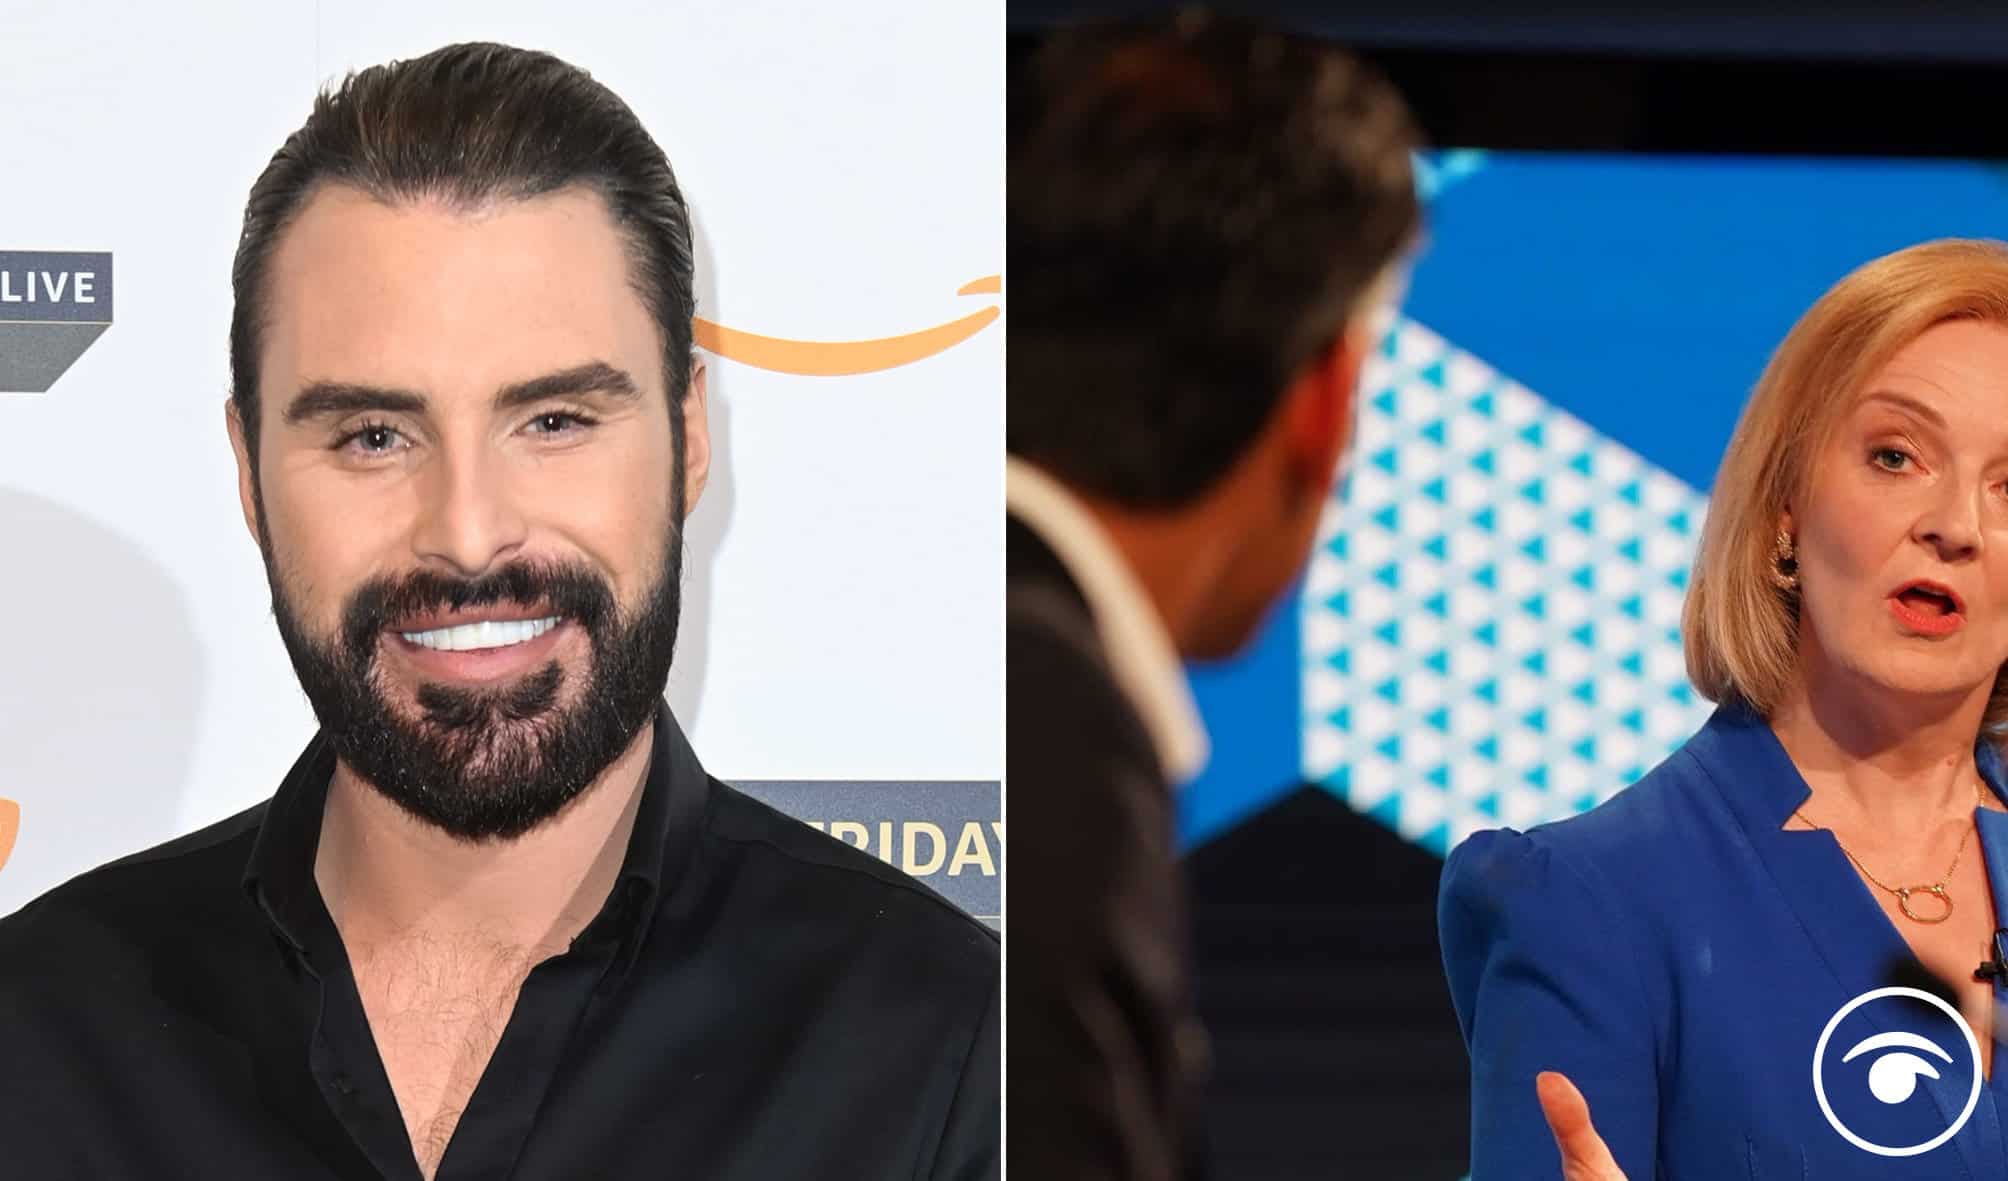 Watch: Rylan Clark rips into Tory leadership hopefuls in NSFW comments – gets standing ovation